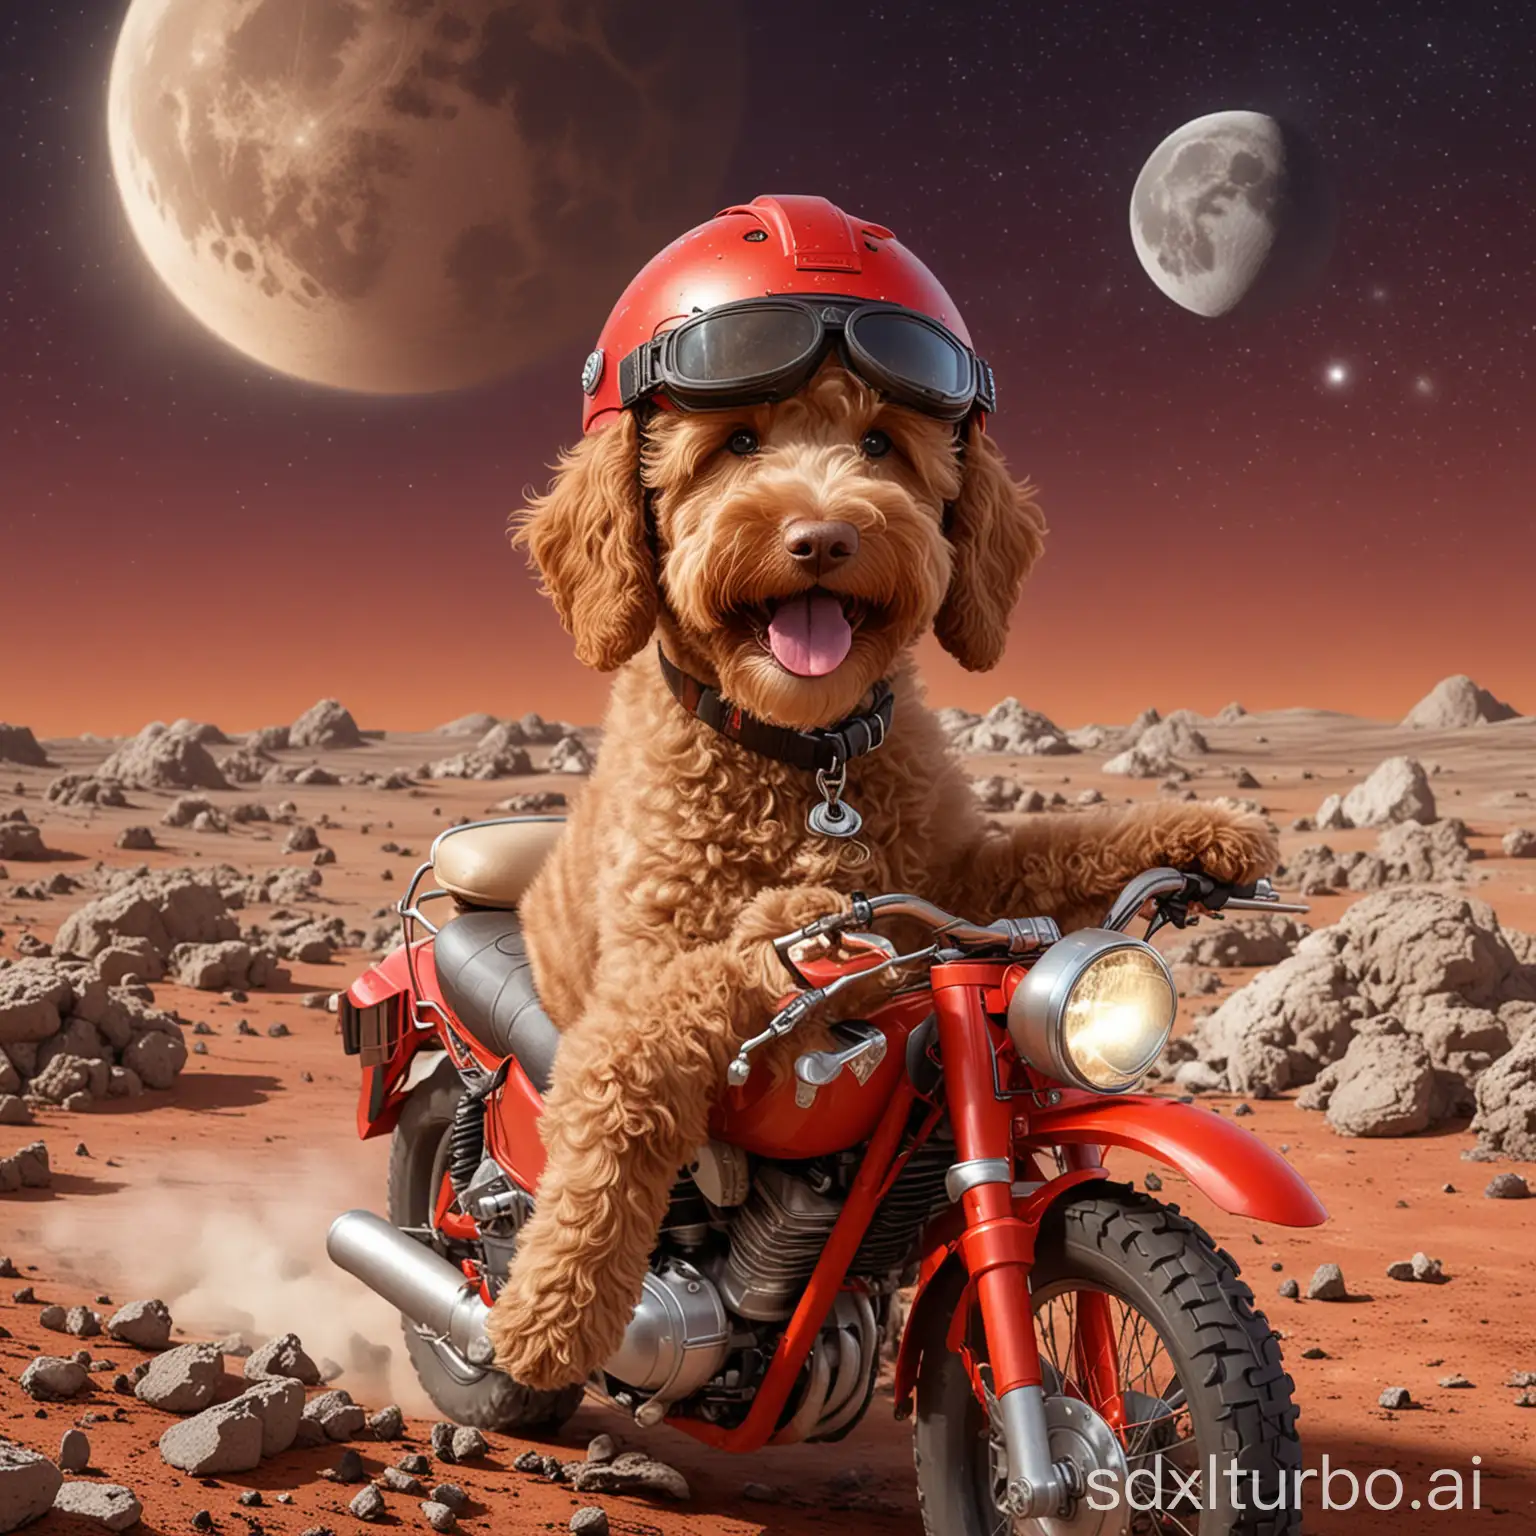 Adventurous-Labradoodle-Riding-Motorcycle-on-Moon-with-Earth-in-Background